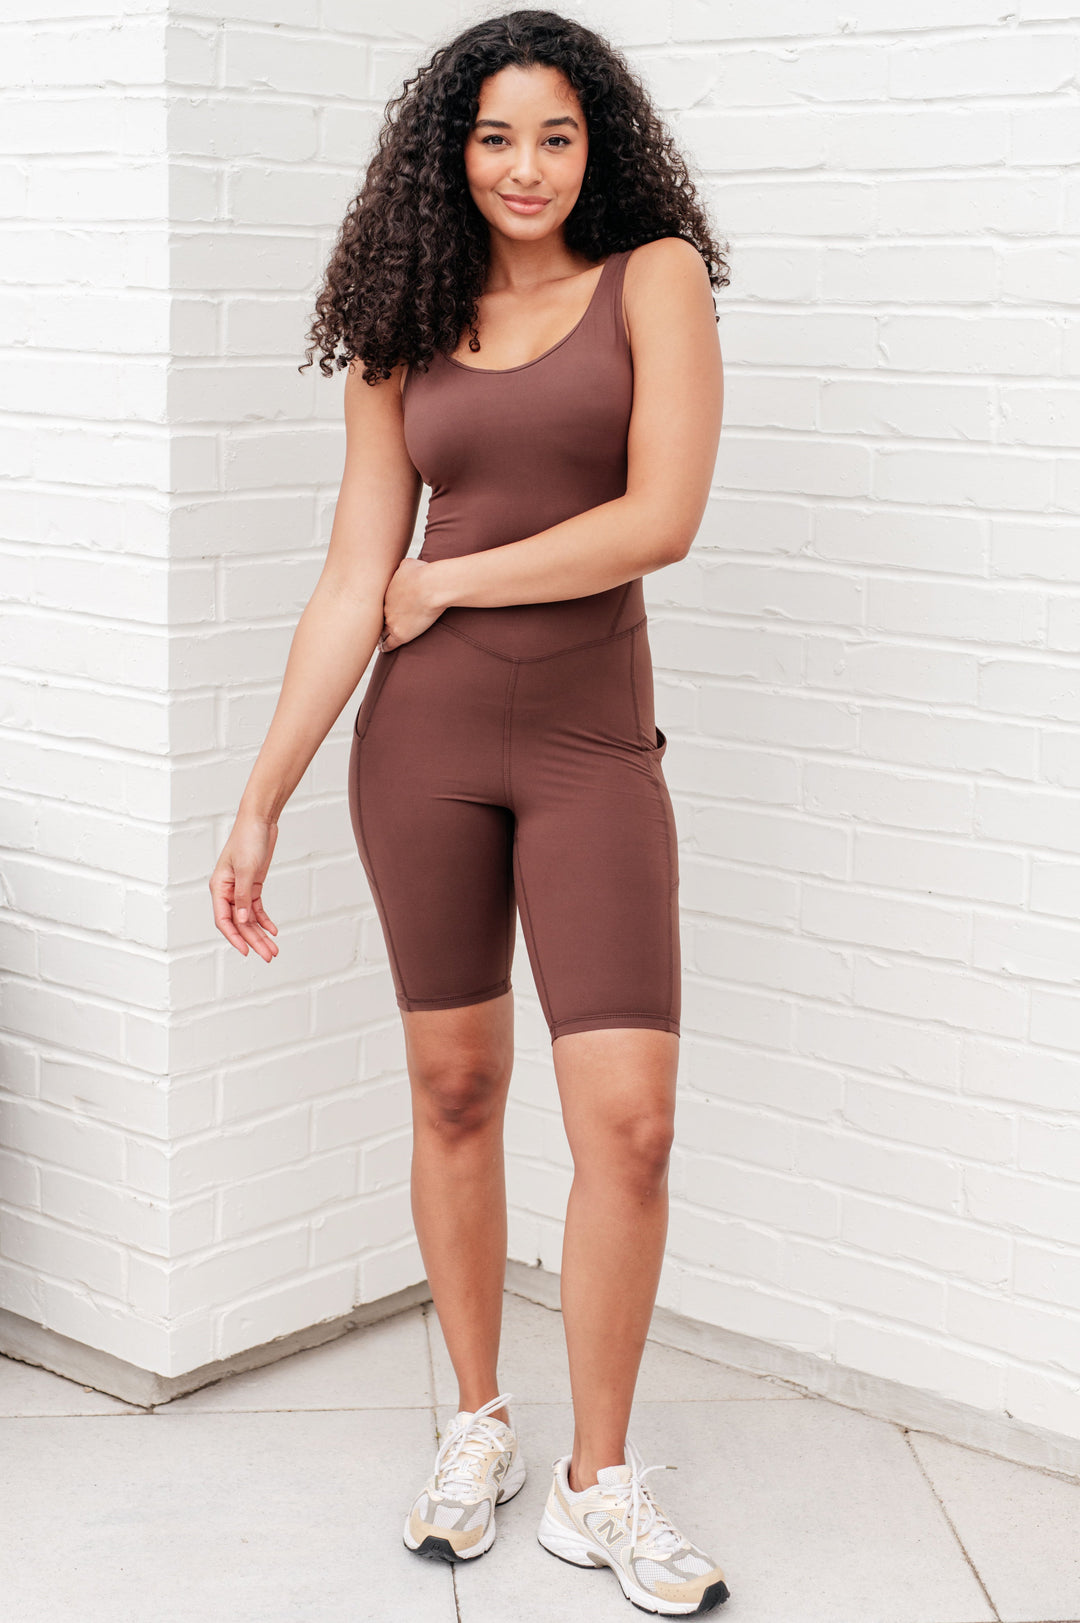 Sun Salutations Body Suit in Java-Jumpsuits & Rompers-Inspired by Justeen-Women's Clothing Boutique in Chicago, Illinois